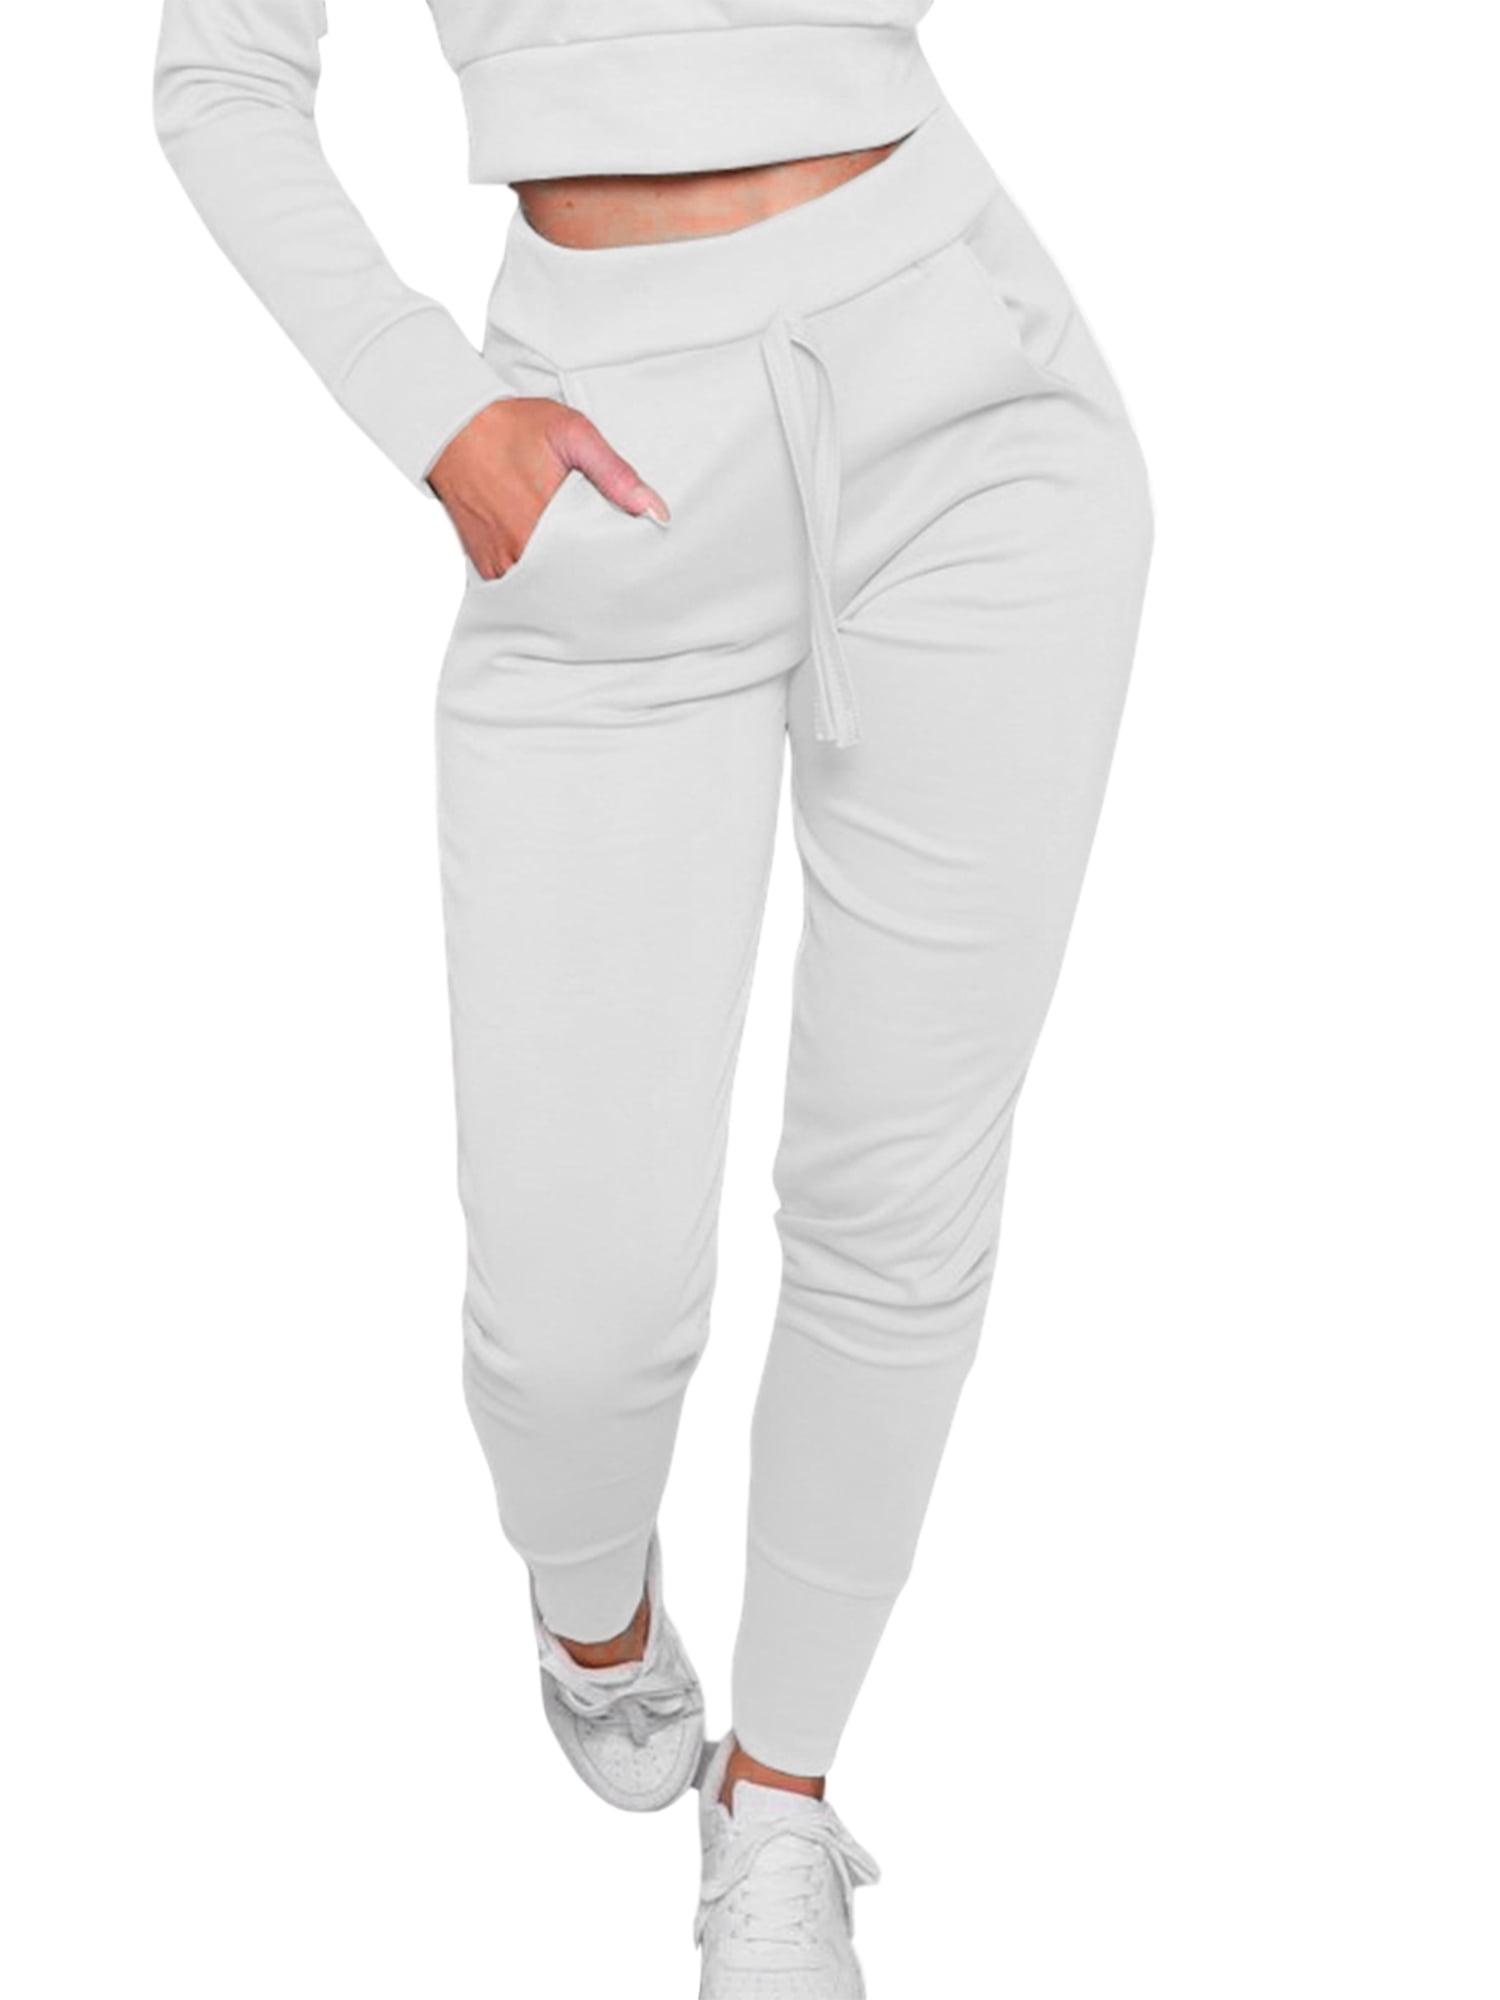 MERSARIPHY Women Jogger Casual Elastic Waist Ankle Cuff Tight Sweatpants 